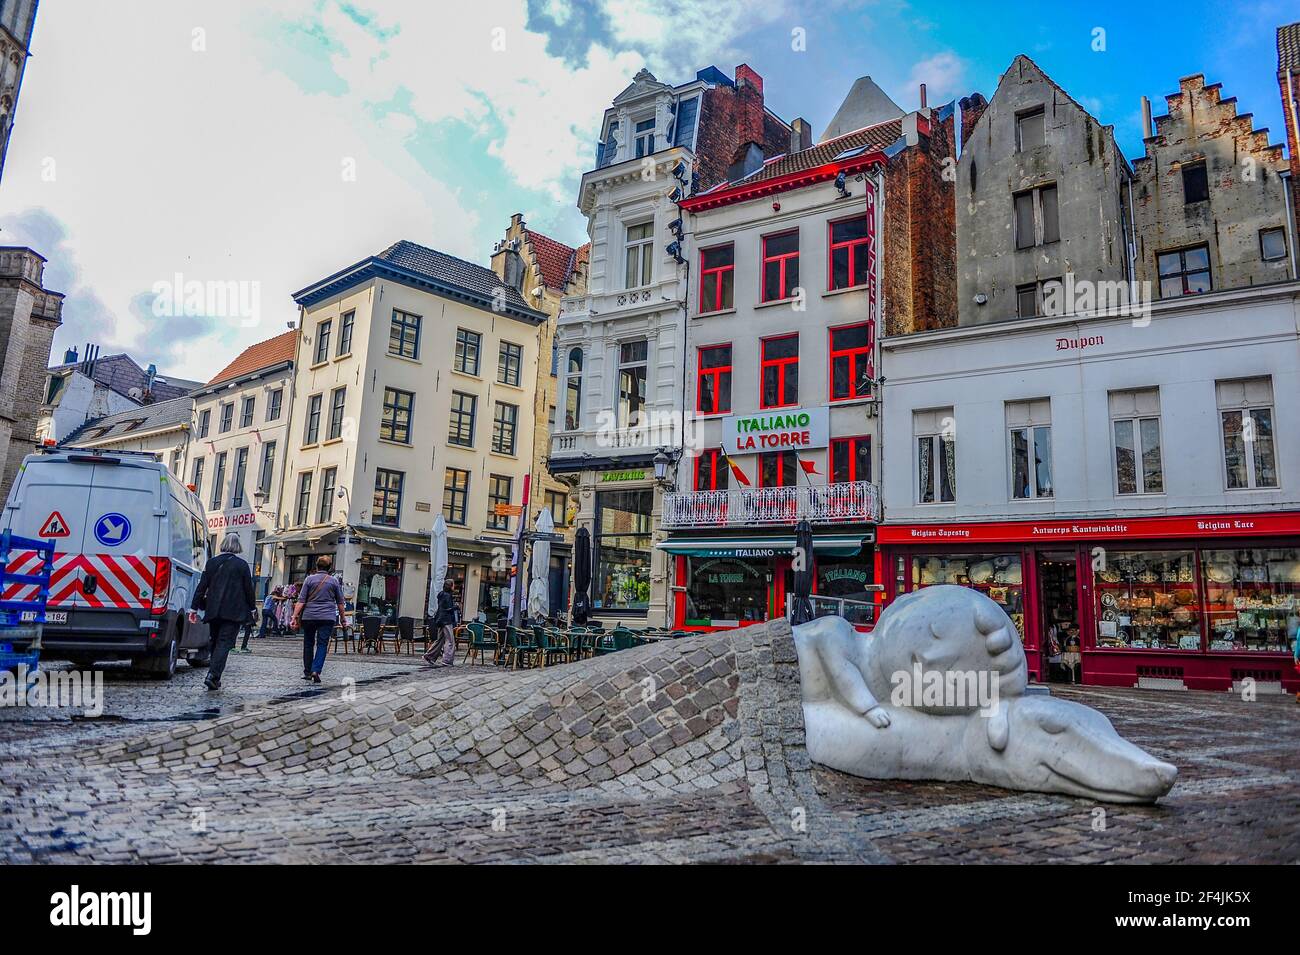 Antwerp, Belgium - July 12, 2019: Nello and Patrasche, characters of a famous novel 'A dog of Flanders', in Antwerp, Belgium Stock Photo